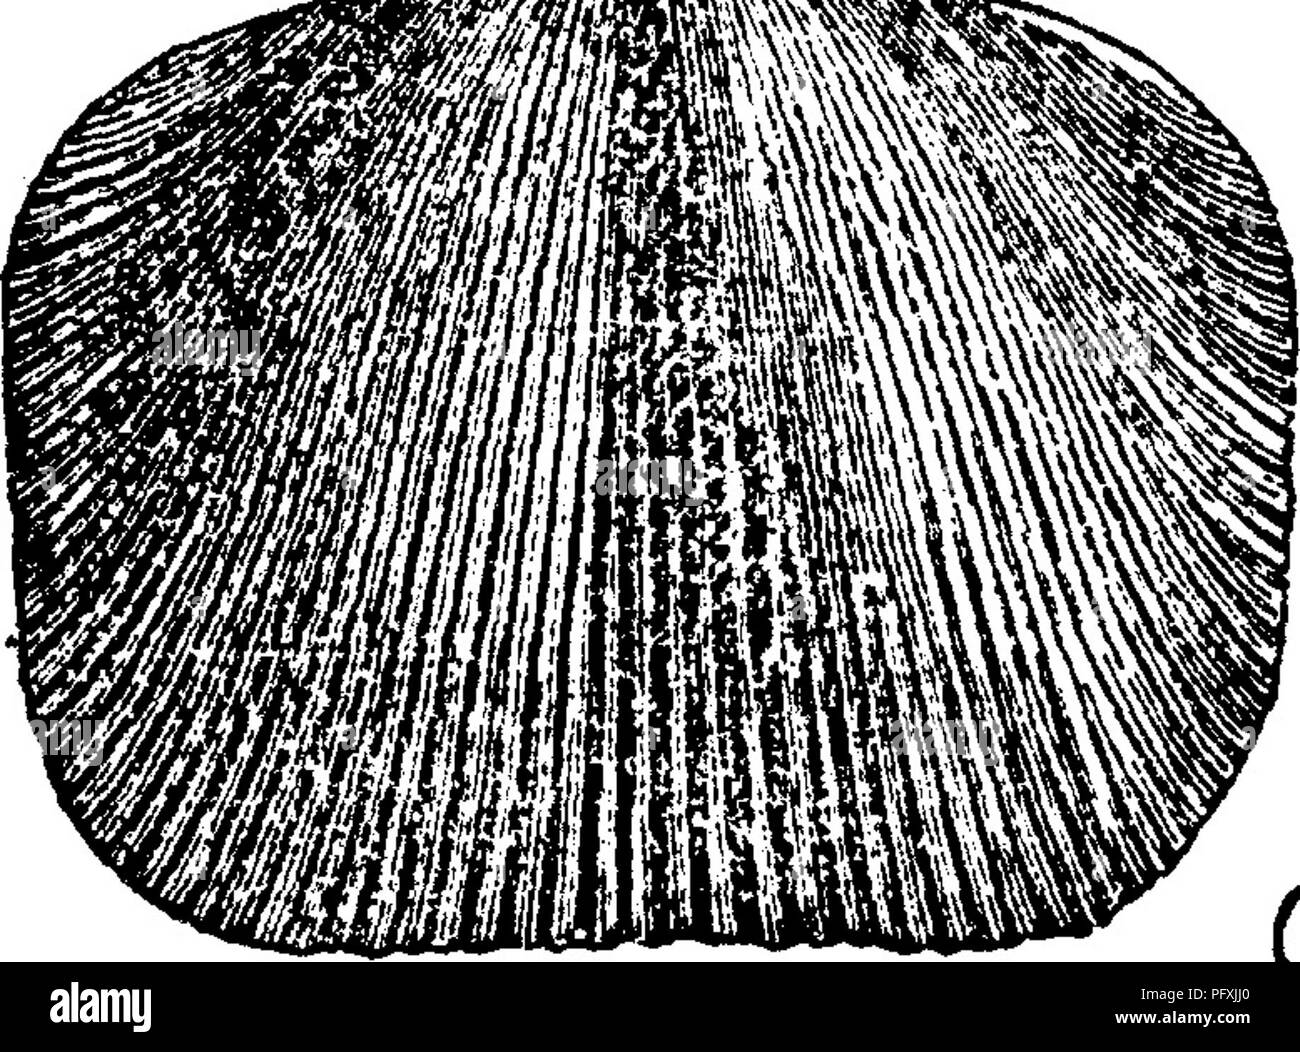 . A dictionary of the fossils of Pennsylvania and neighboring states named in the reports and catalogues of the survey ... Paleontology. of 18, 19; 22, dorsal interior; 23, Aentral interior, scars, teeth, slightly distorted and imperfect; 24, 25, dorsal and lateral of small round specimen, strong growth lines, twice natural size.—Hall, Geol. 4th Dist. 1843, p. 105, f. 36,1 a,7i,7 c. (See March. Sil. Res. 13, f. 11.) In Niagara limestone, Vh 000, p. 233, specimens 506-10, -14, -16, -17, -19, in 0. E. Hall's coll. 2 m. S. W of Bell's Mills, Blair Co., Pa., from Clinton shale, V a. Orthis imperat Stock Photo